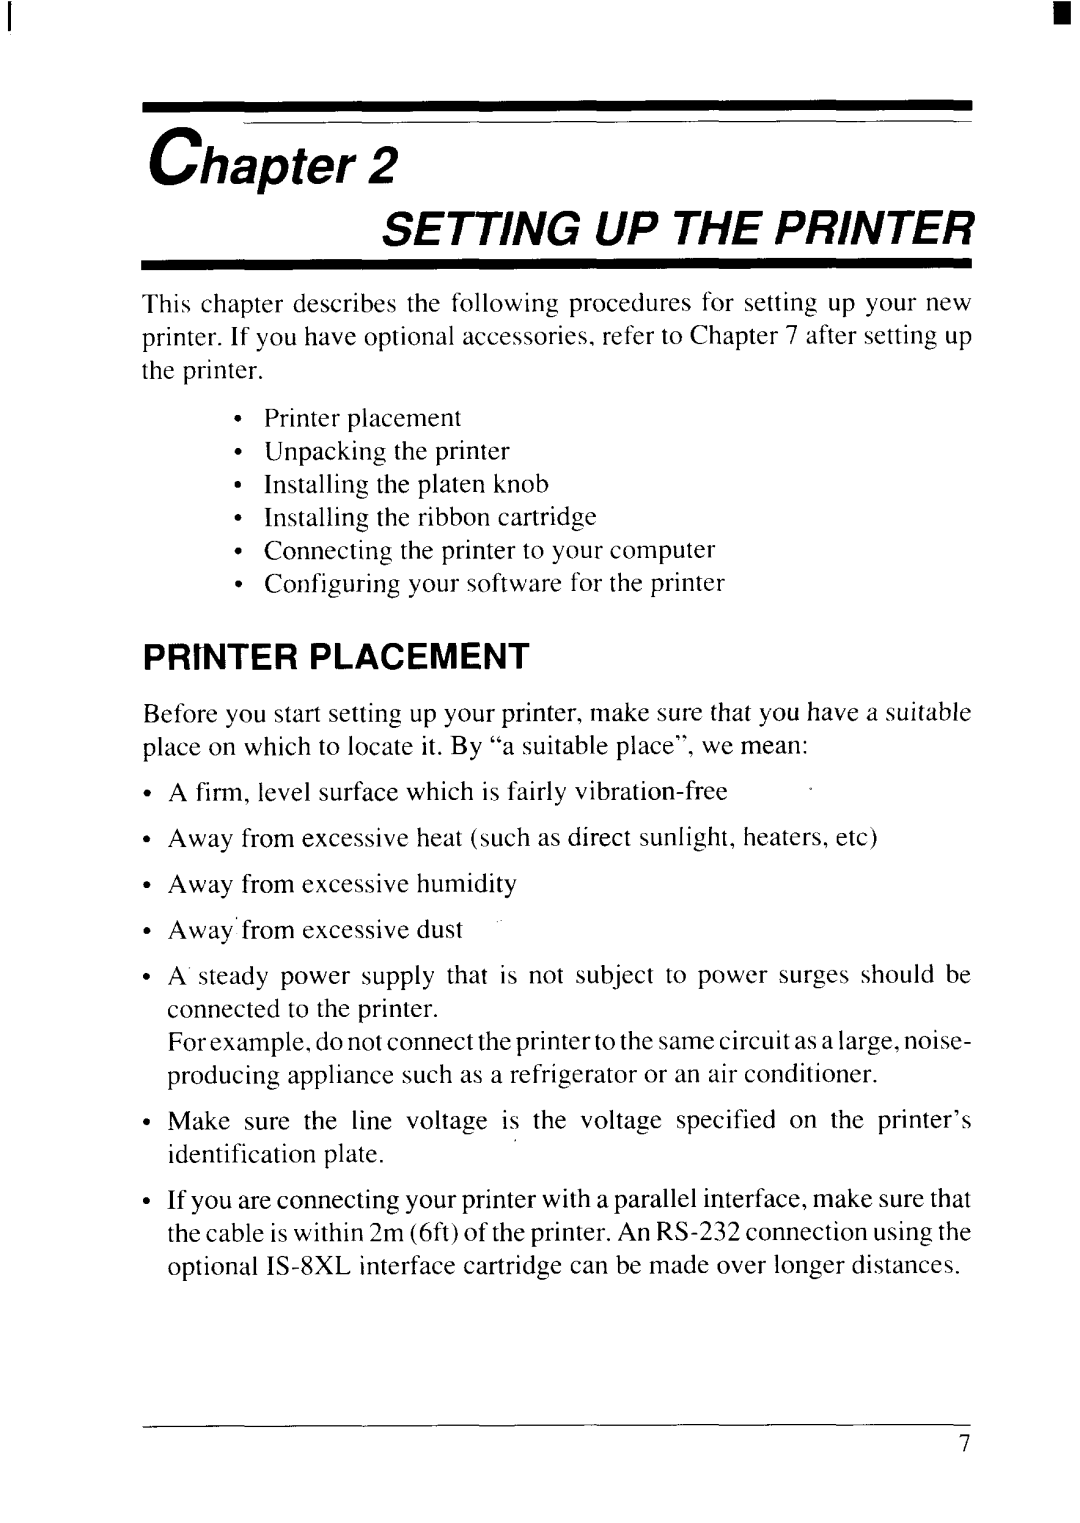 Star Micronics NX-2415II user manual Setting Up The Printer, PRtNTER PLACEMENT 